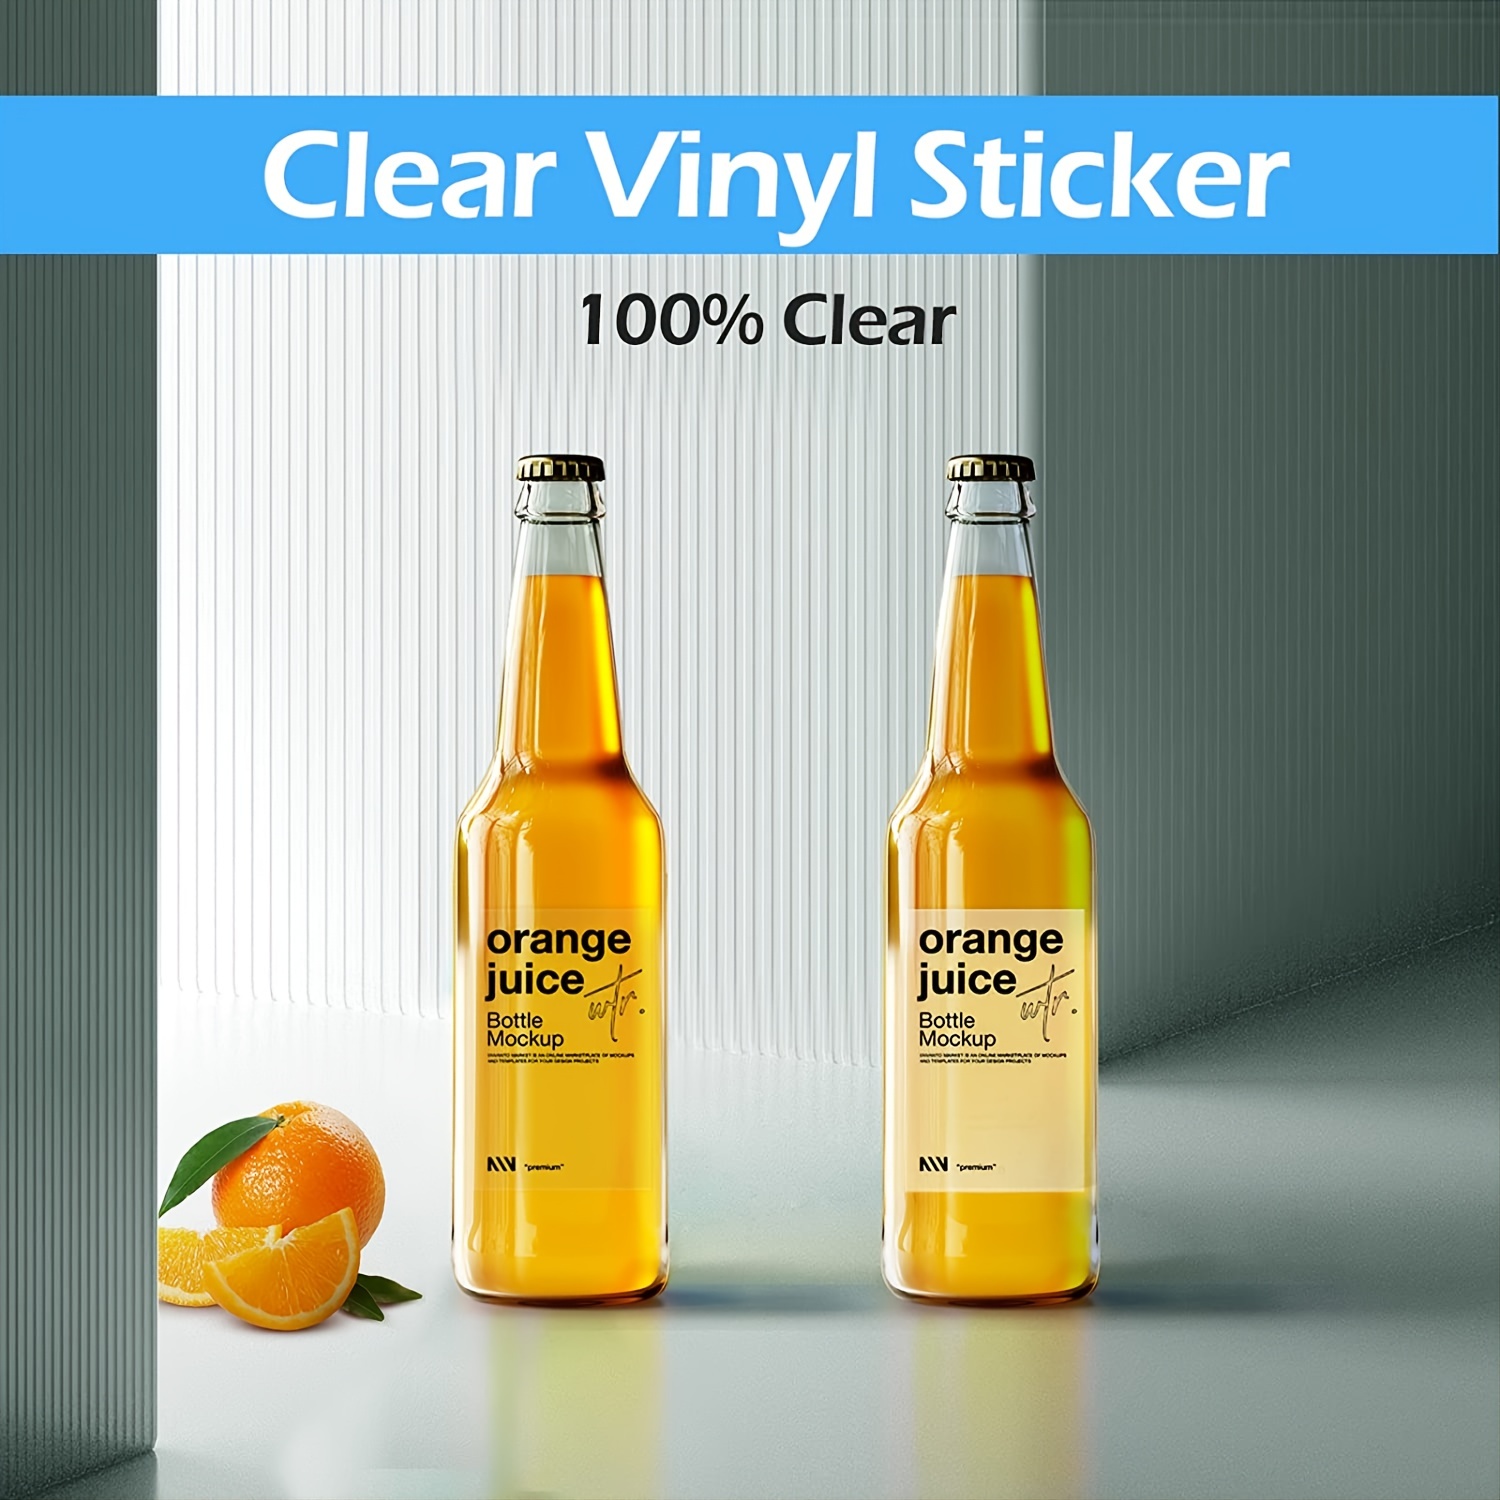 20 Sheets) 90% Clear Sticker Paper for Inkjet Printer - Glossy 8.5 x 11 -  Printable Vinyl Sticker Paper for Circut - Personalized Stickers - Labels -  Transparent - Adhesive - Decal - 90% Clear Sheets 